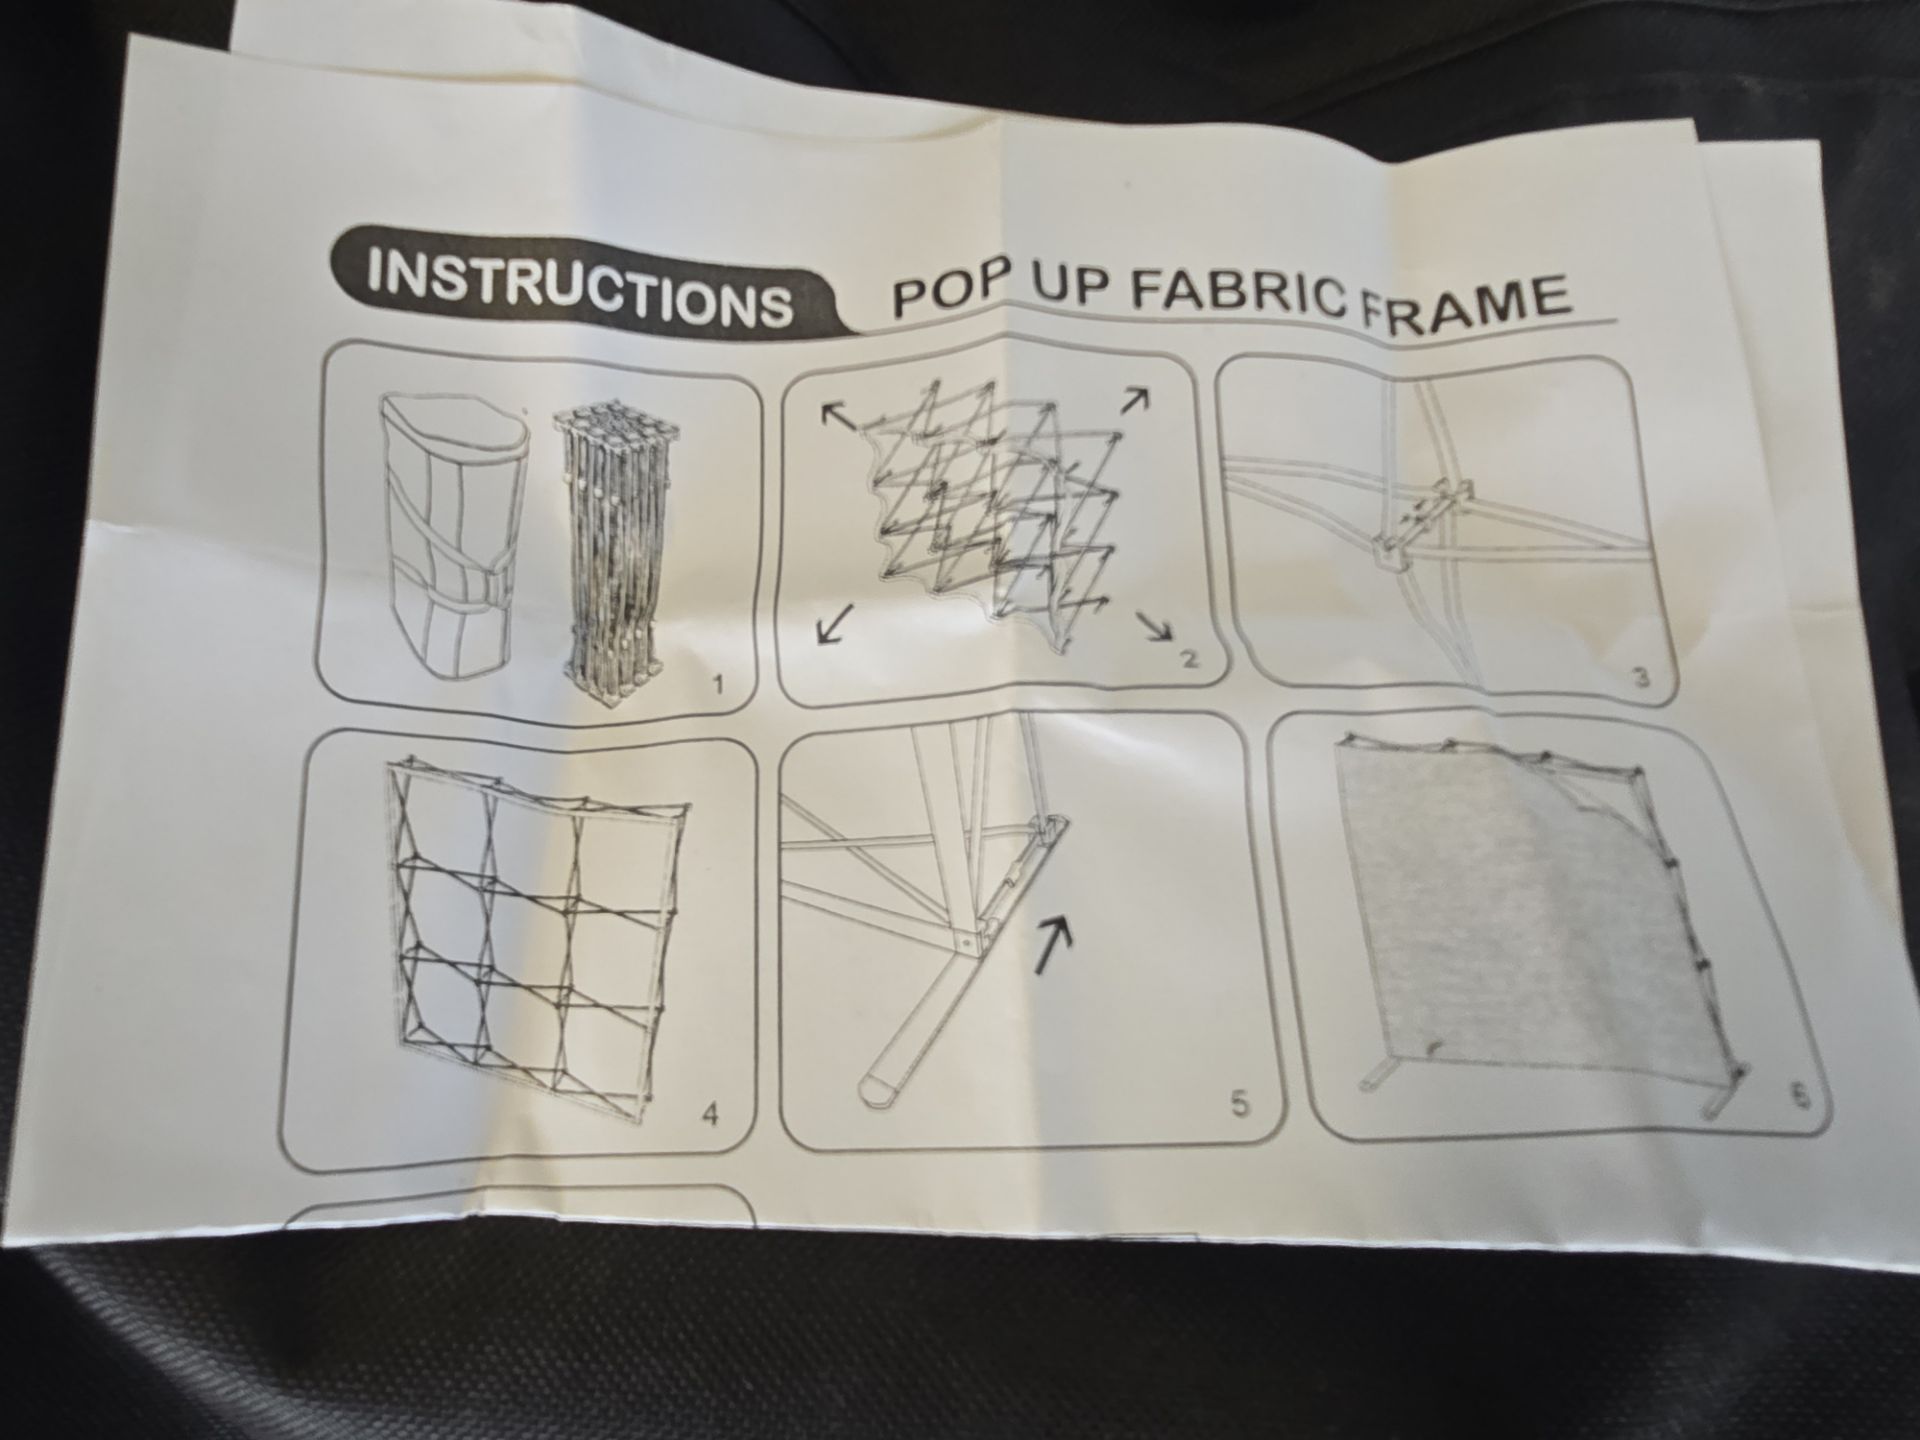 POP UP FABRIC FRAME - Image 2 of 2